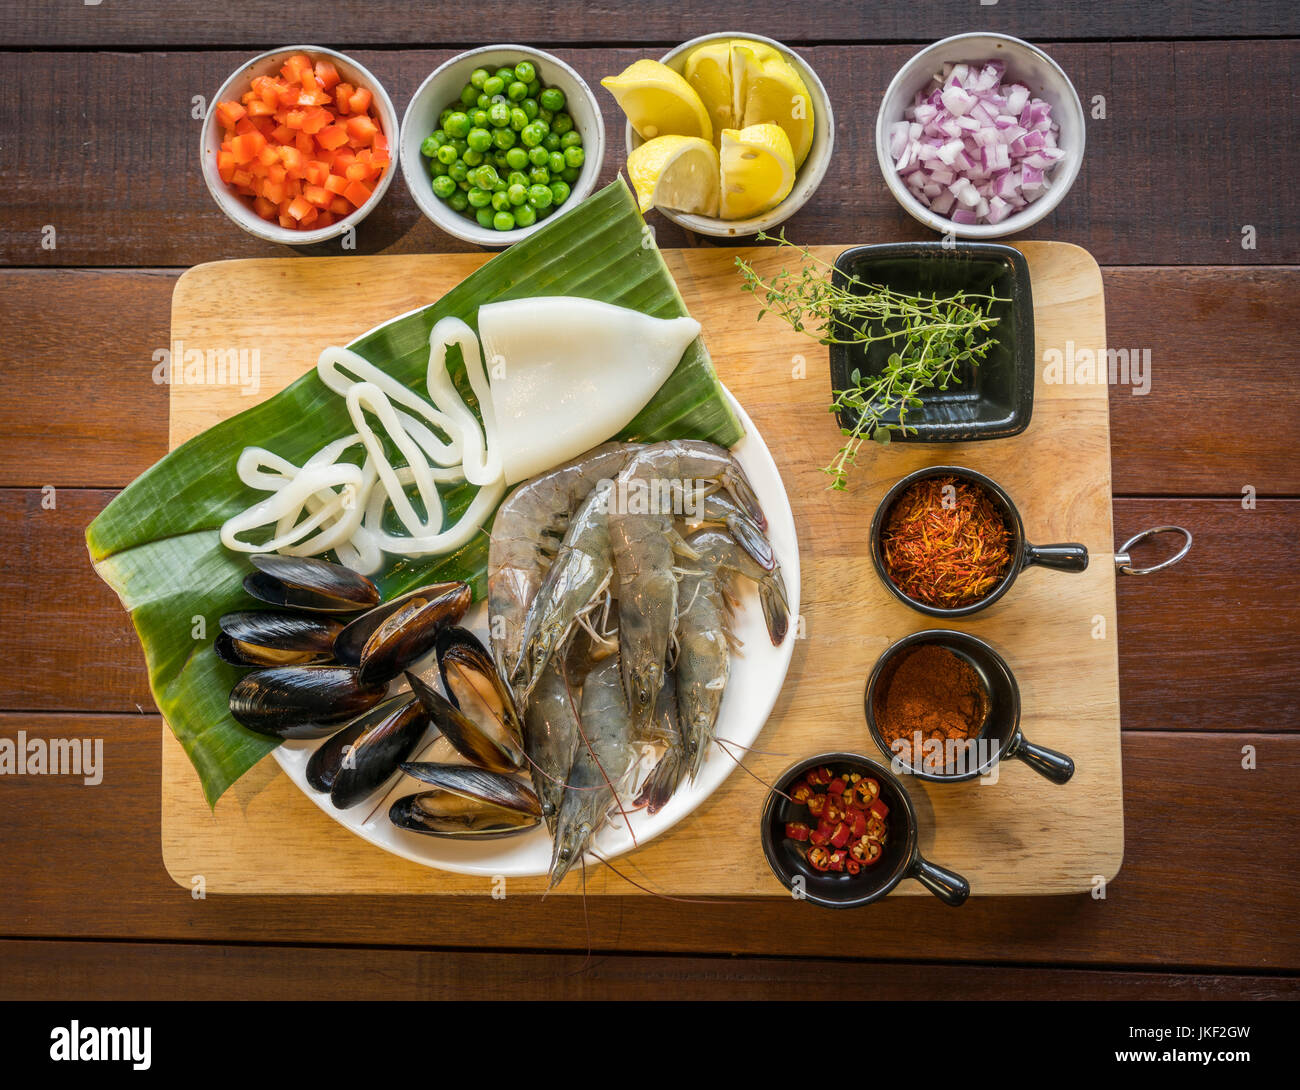 Raw seafood on plate, healthy food, prawn, clam squid. Stock Photo